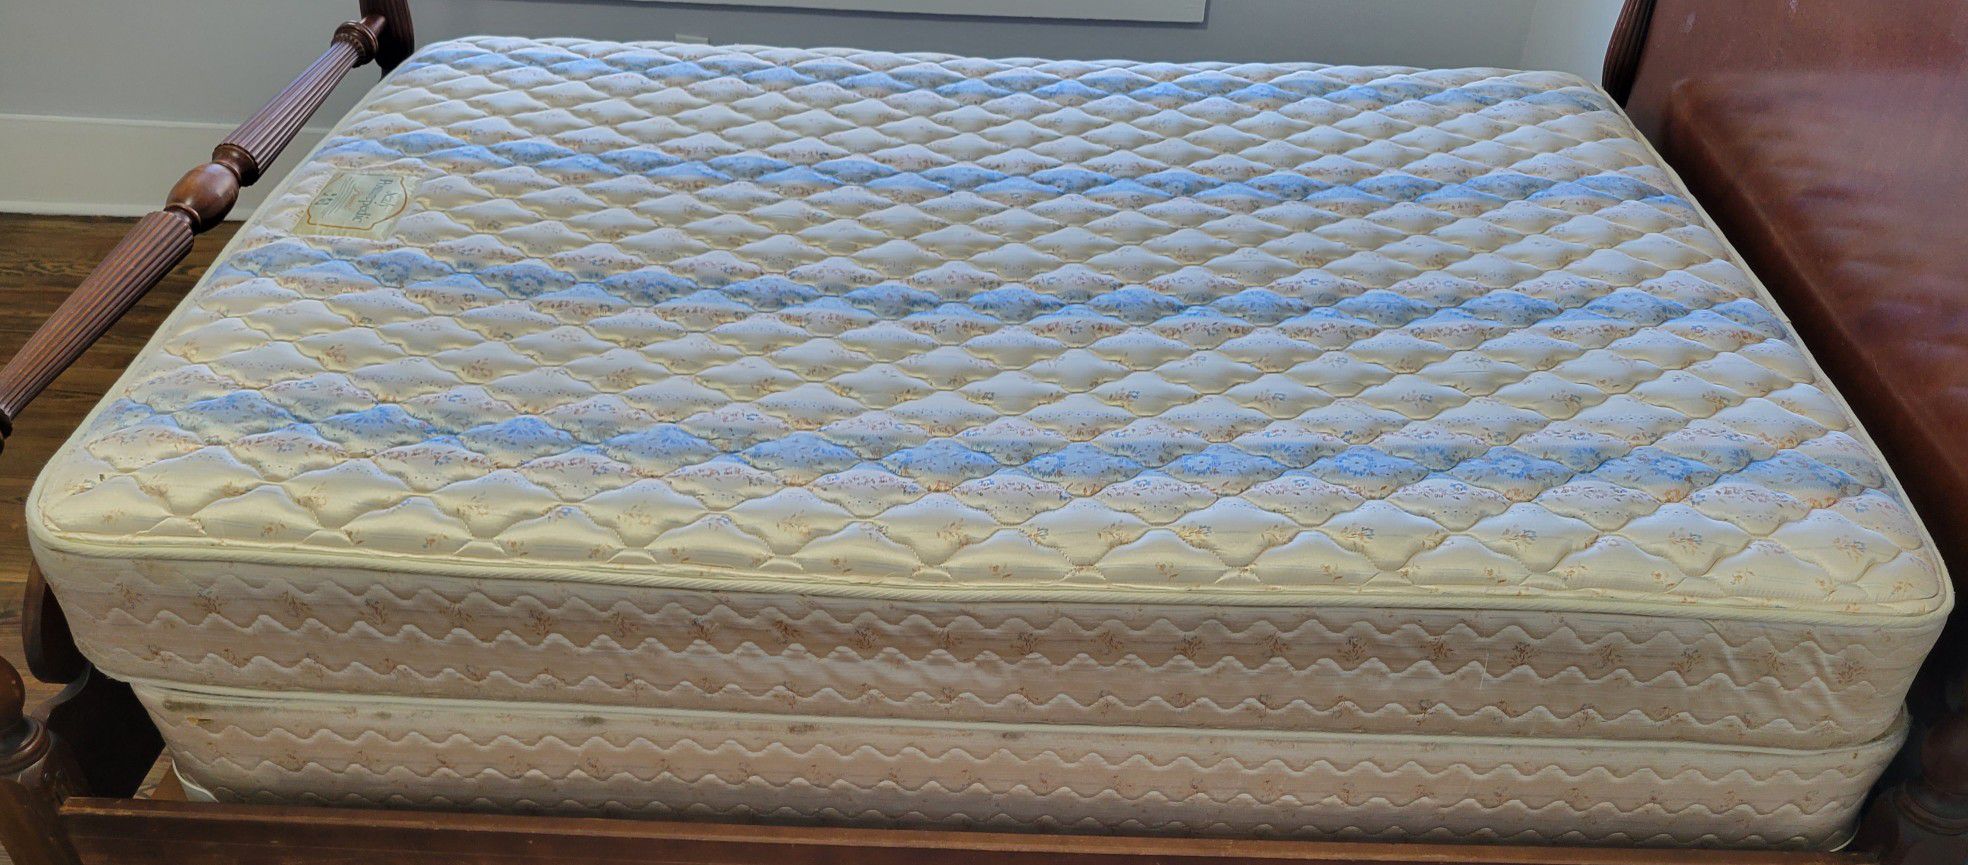 Mattress/Boxspring/Antique Bed Frame(Full Size)